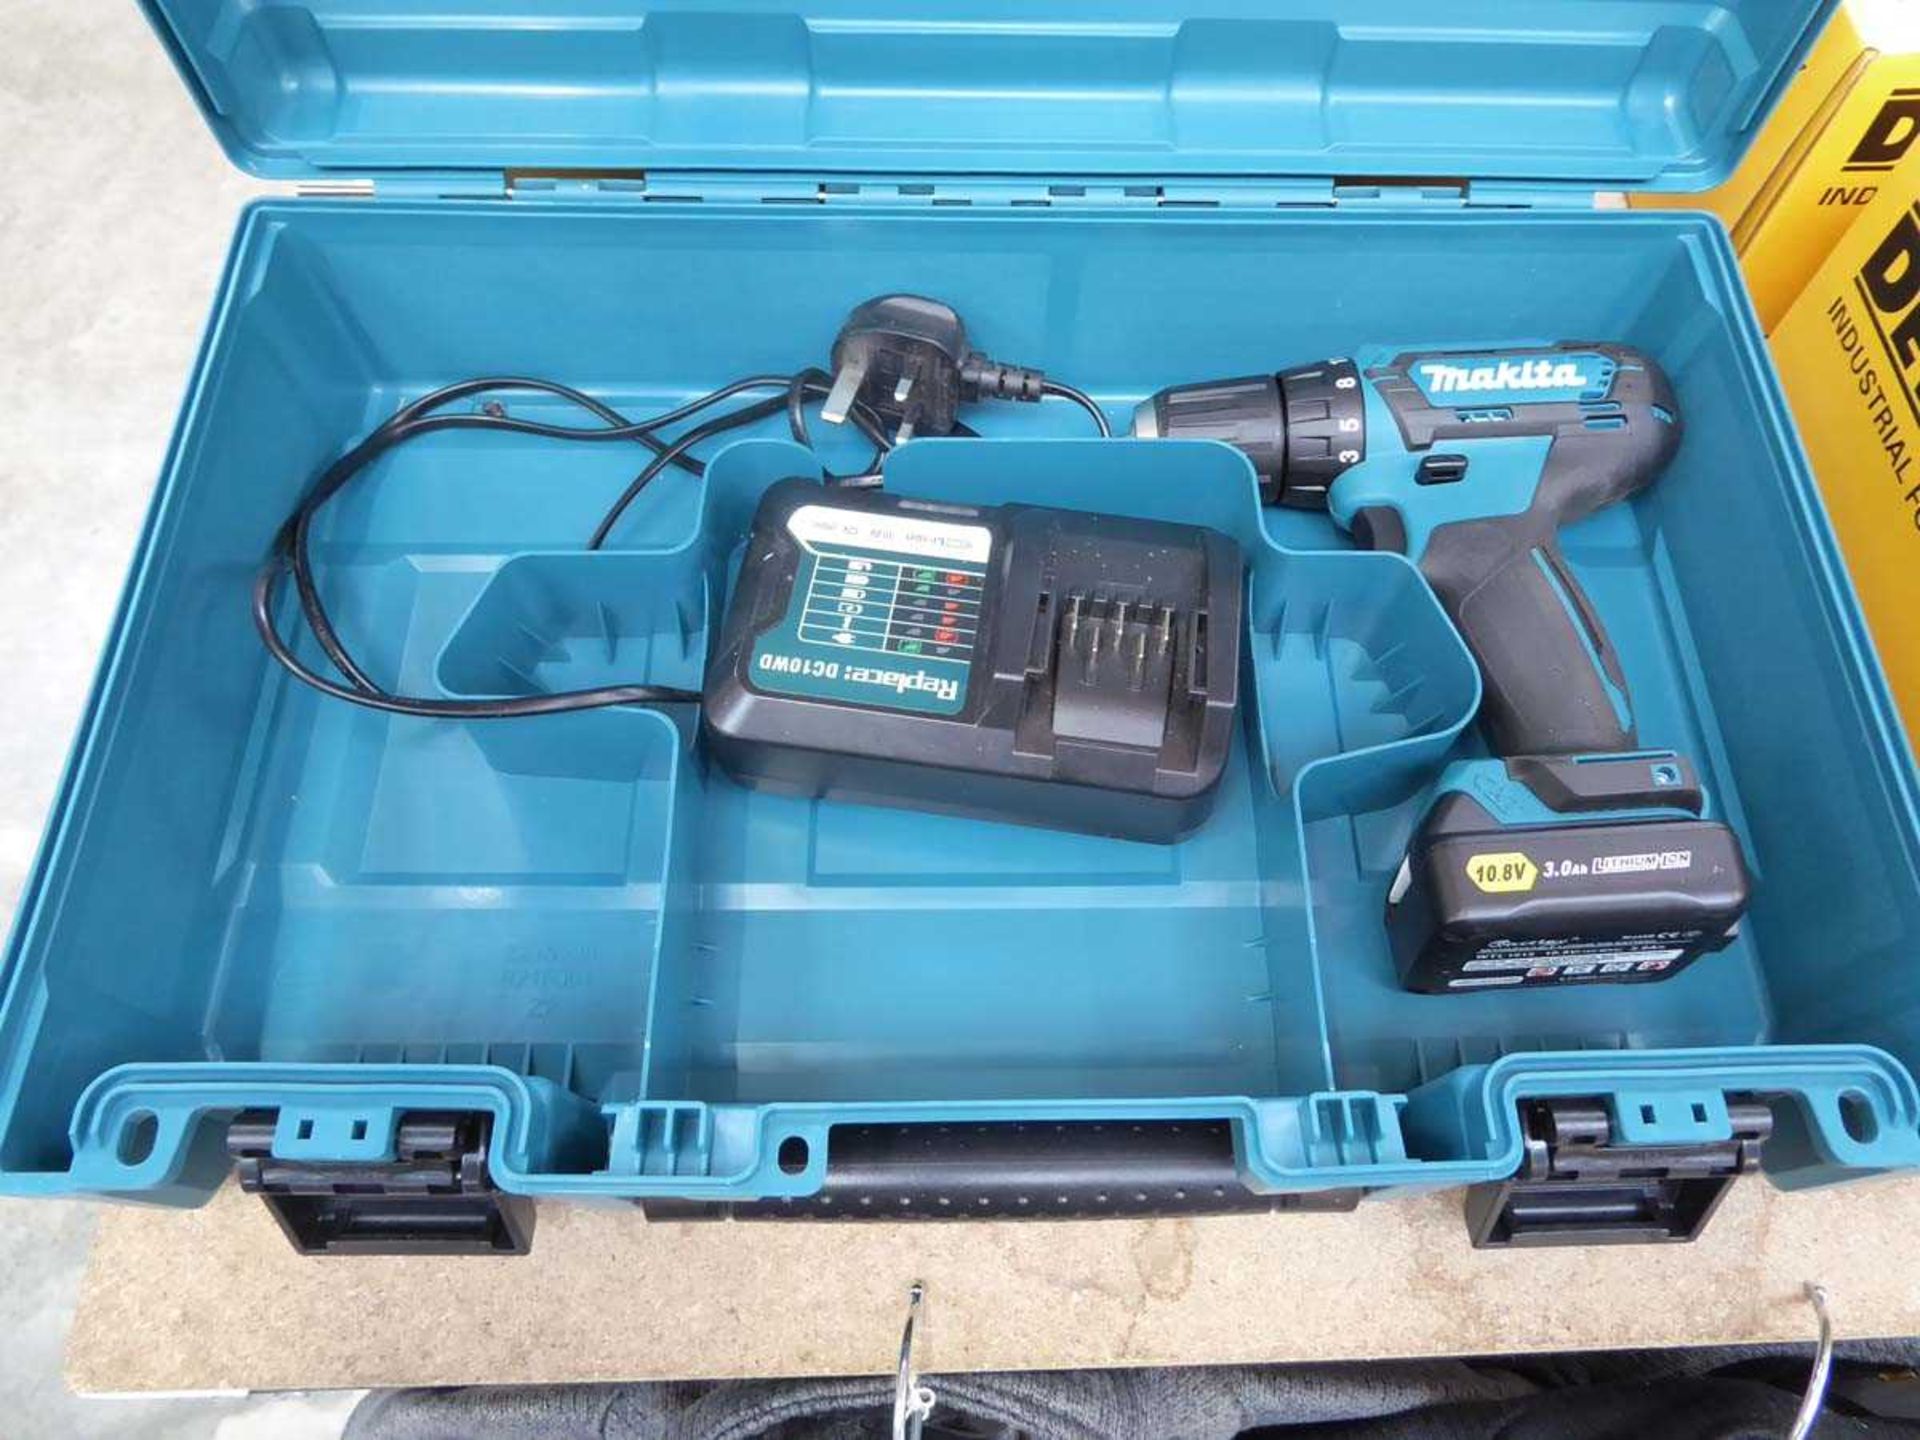 Cased Makita cordless drill with battery and charger